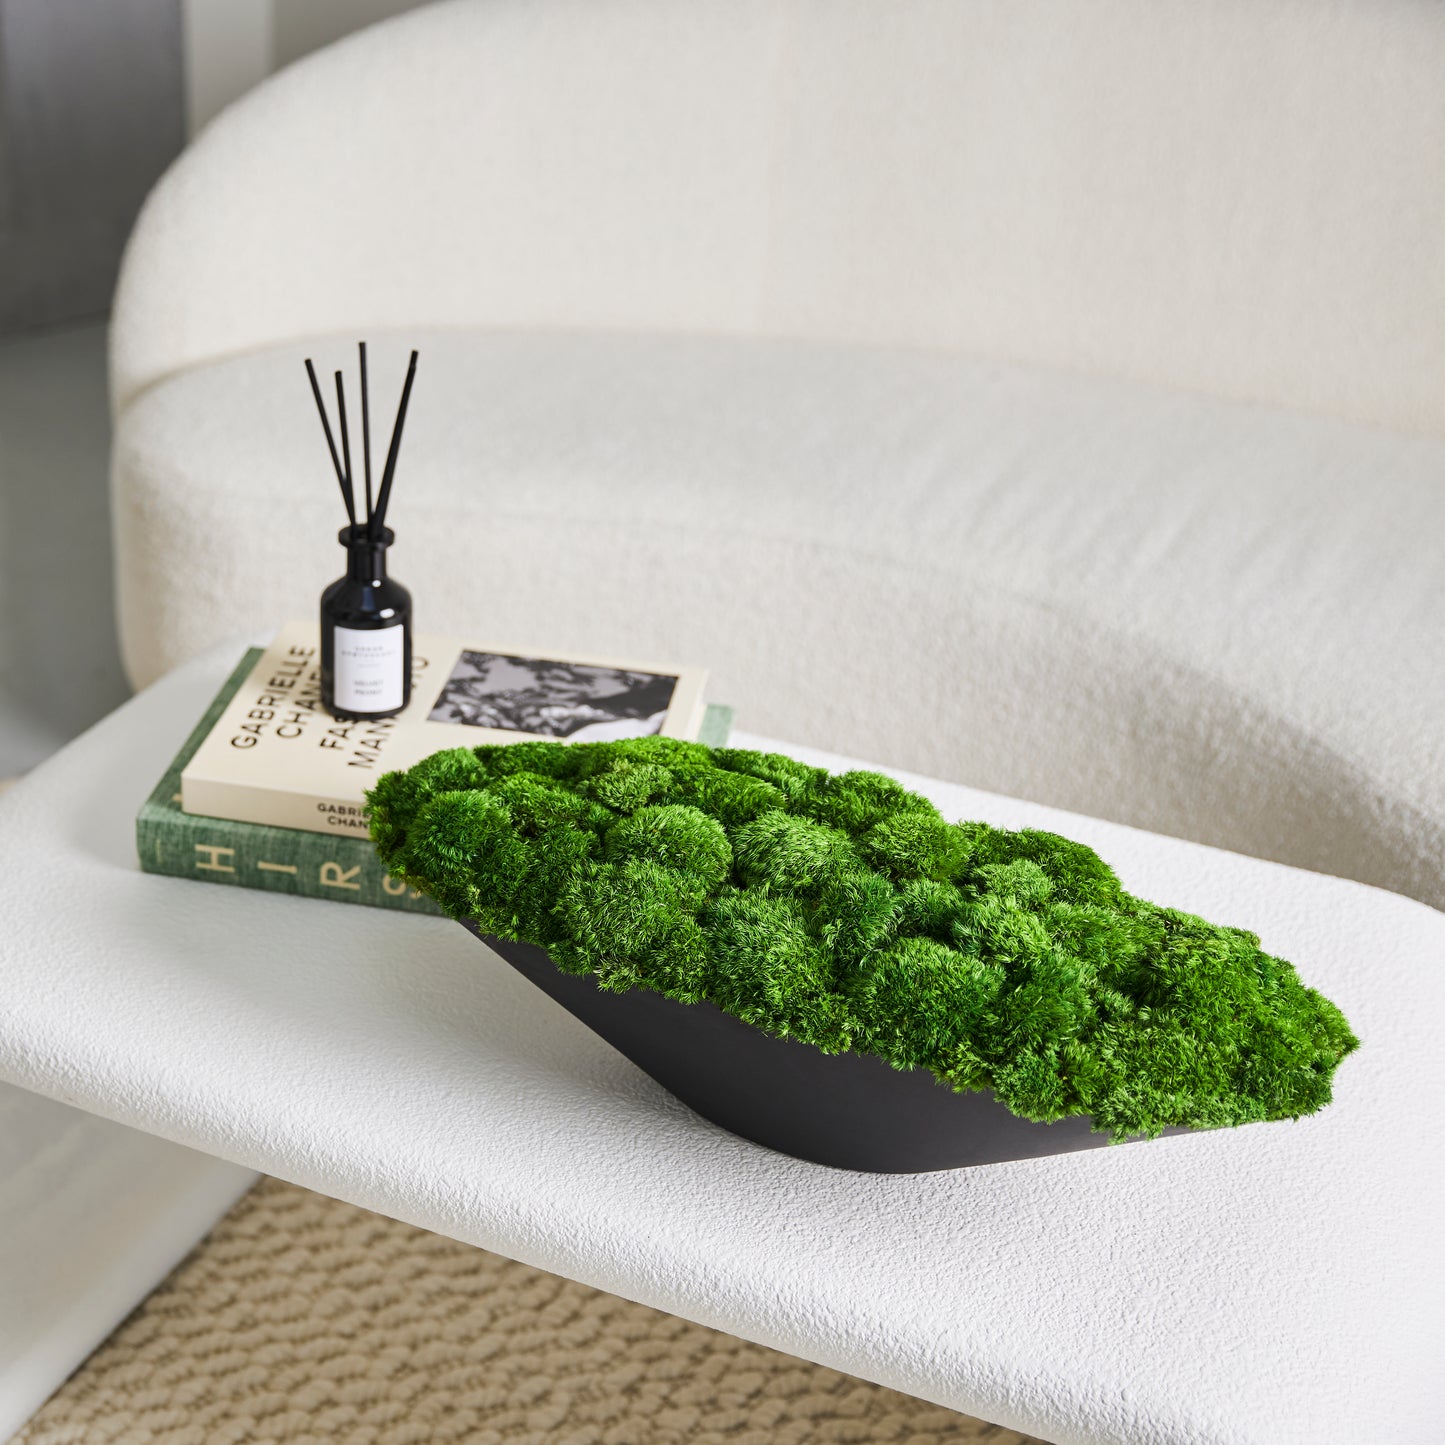 A lush piece of preserved moss. Finished with a black ceramic boat-shaped base. Displayed on a white coffee table.